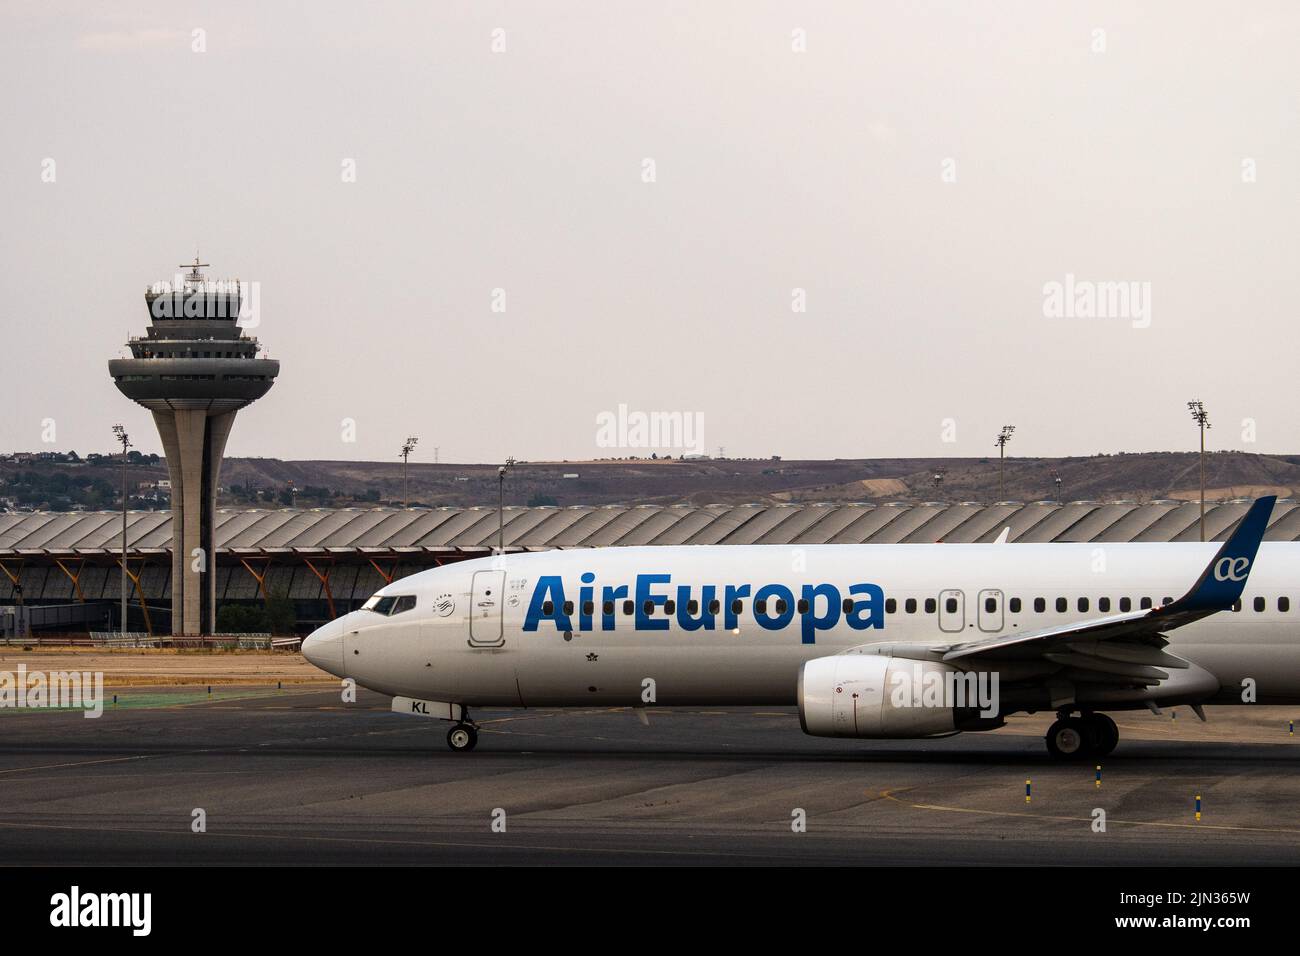 An Air Europa airplane in seen on the runway at Adolfo Suarez Madrid Barajas Airport passing by the air traffic control tower. Stock Photo